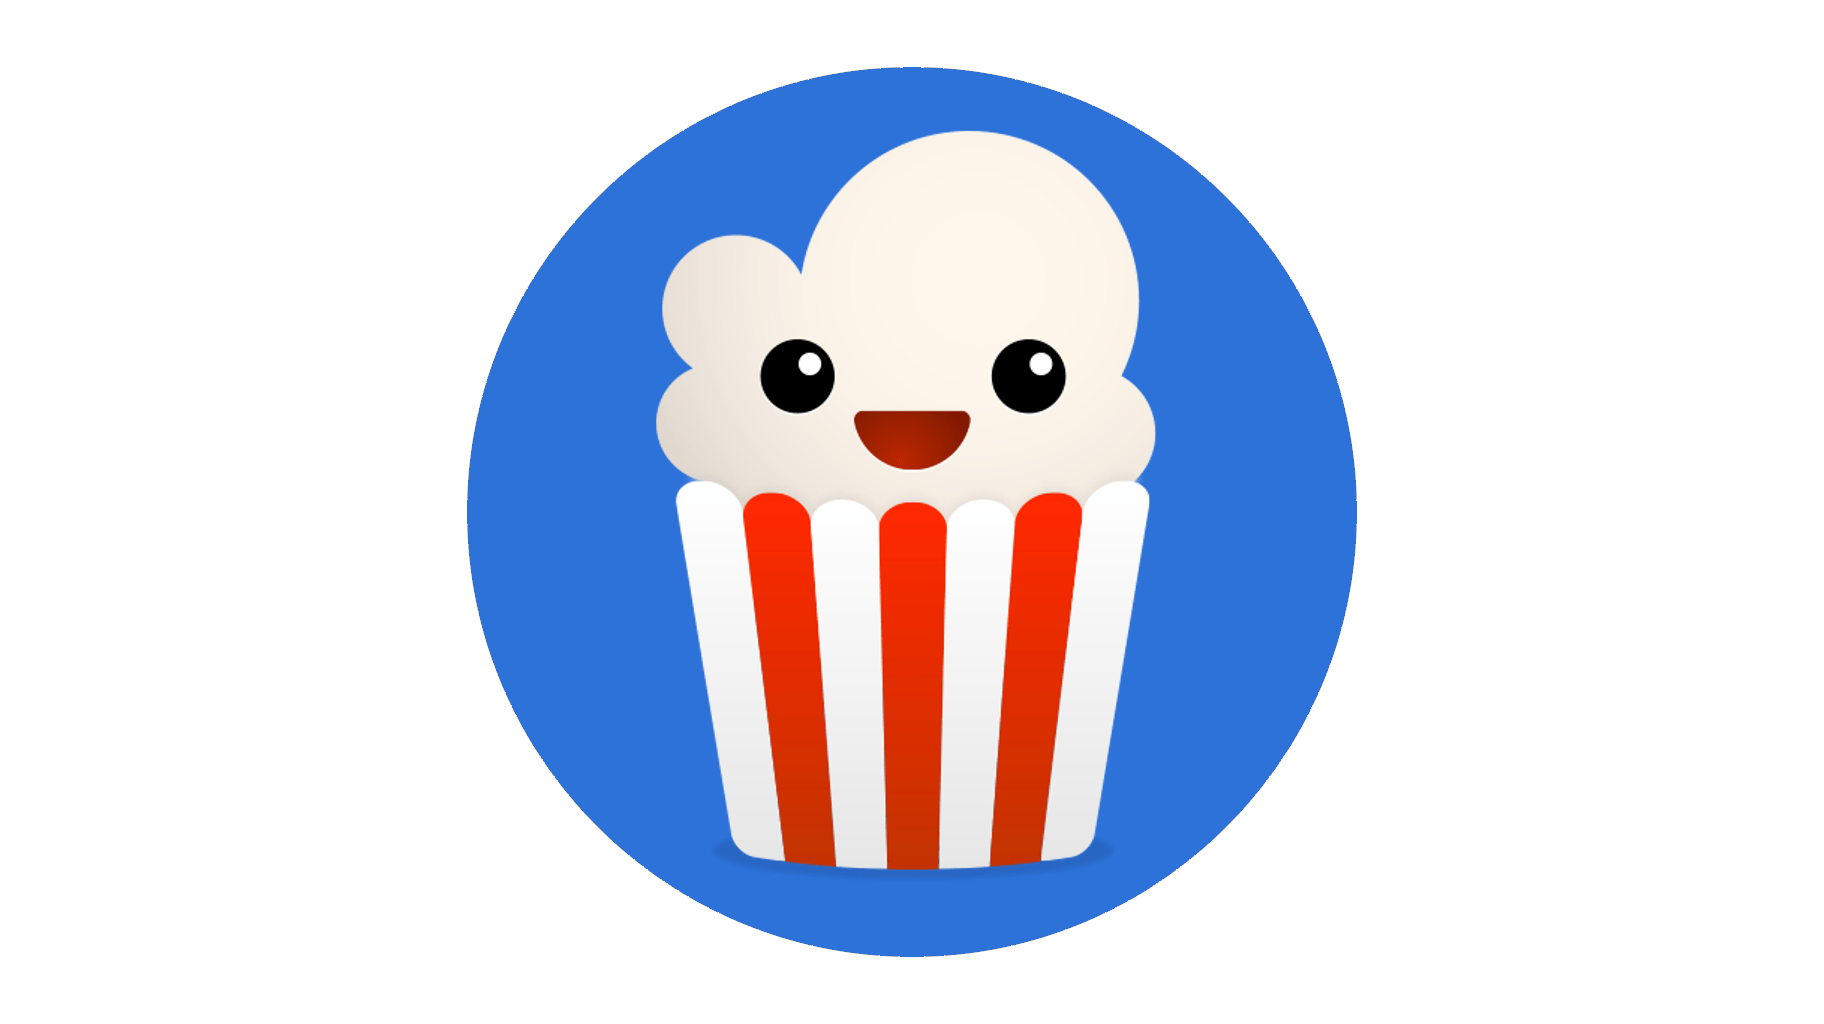 Popcorn Time permanently closes: "free" movie streaming site shows a picture of the lifeless popcorn